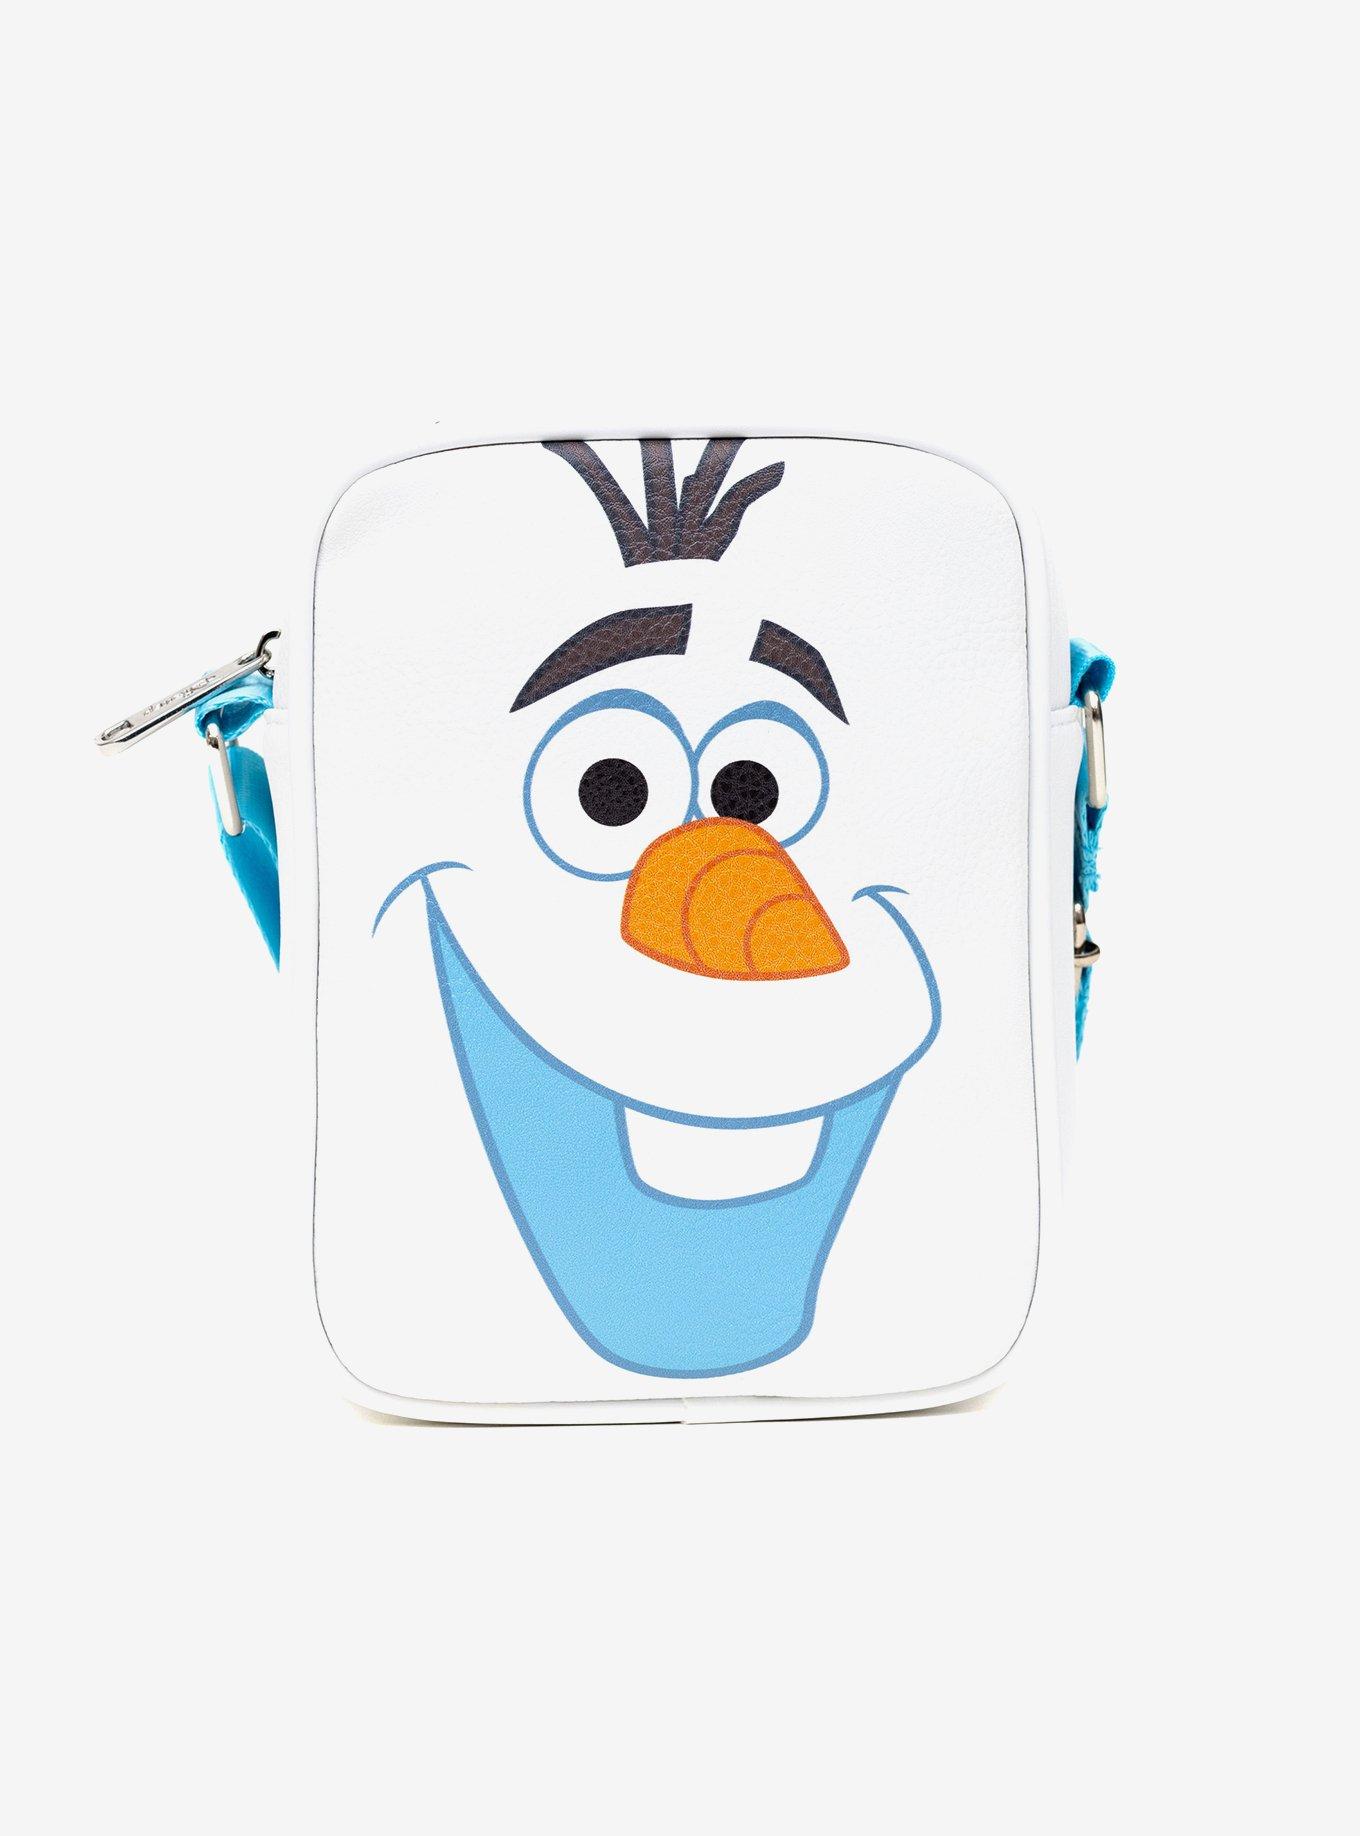 Disney Frozen Olaf Smiling Face Character Close Up Crossbody Bag